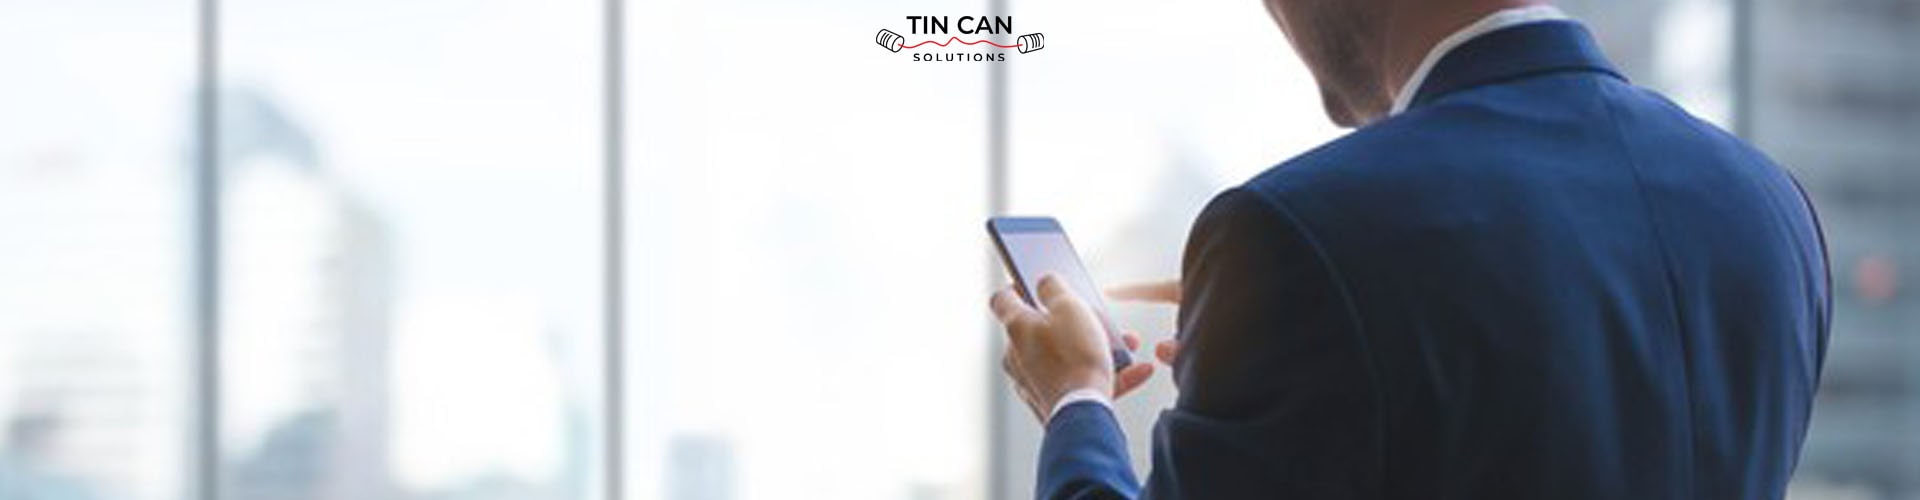 Cellular coverage by Tin Can Solutions